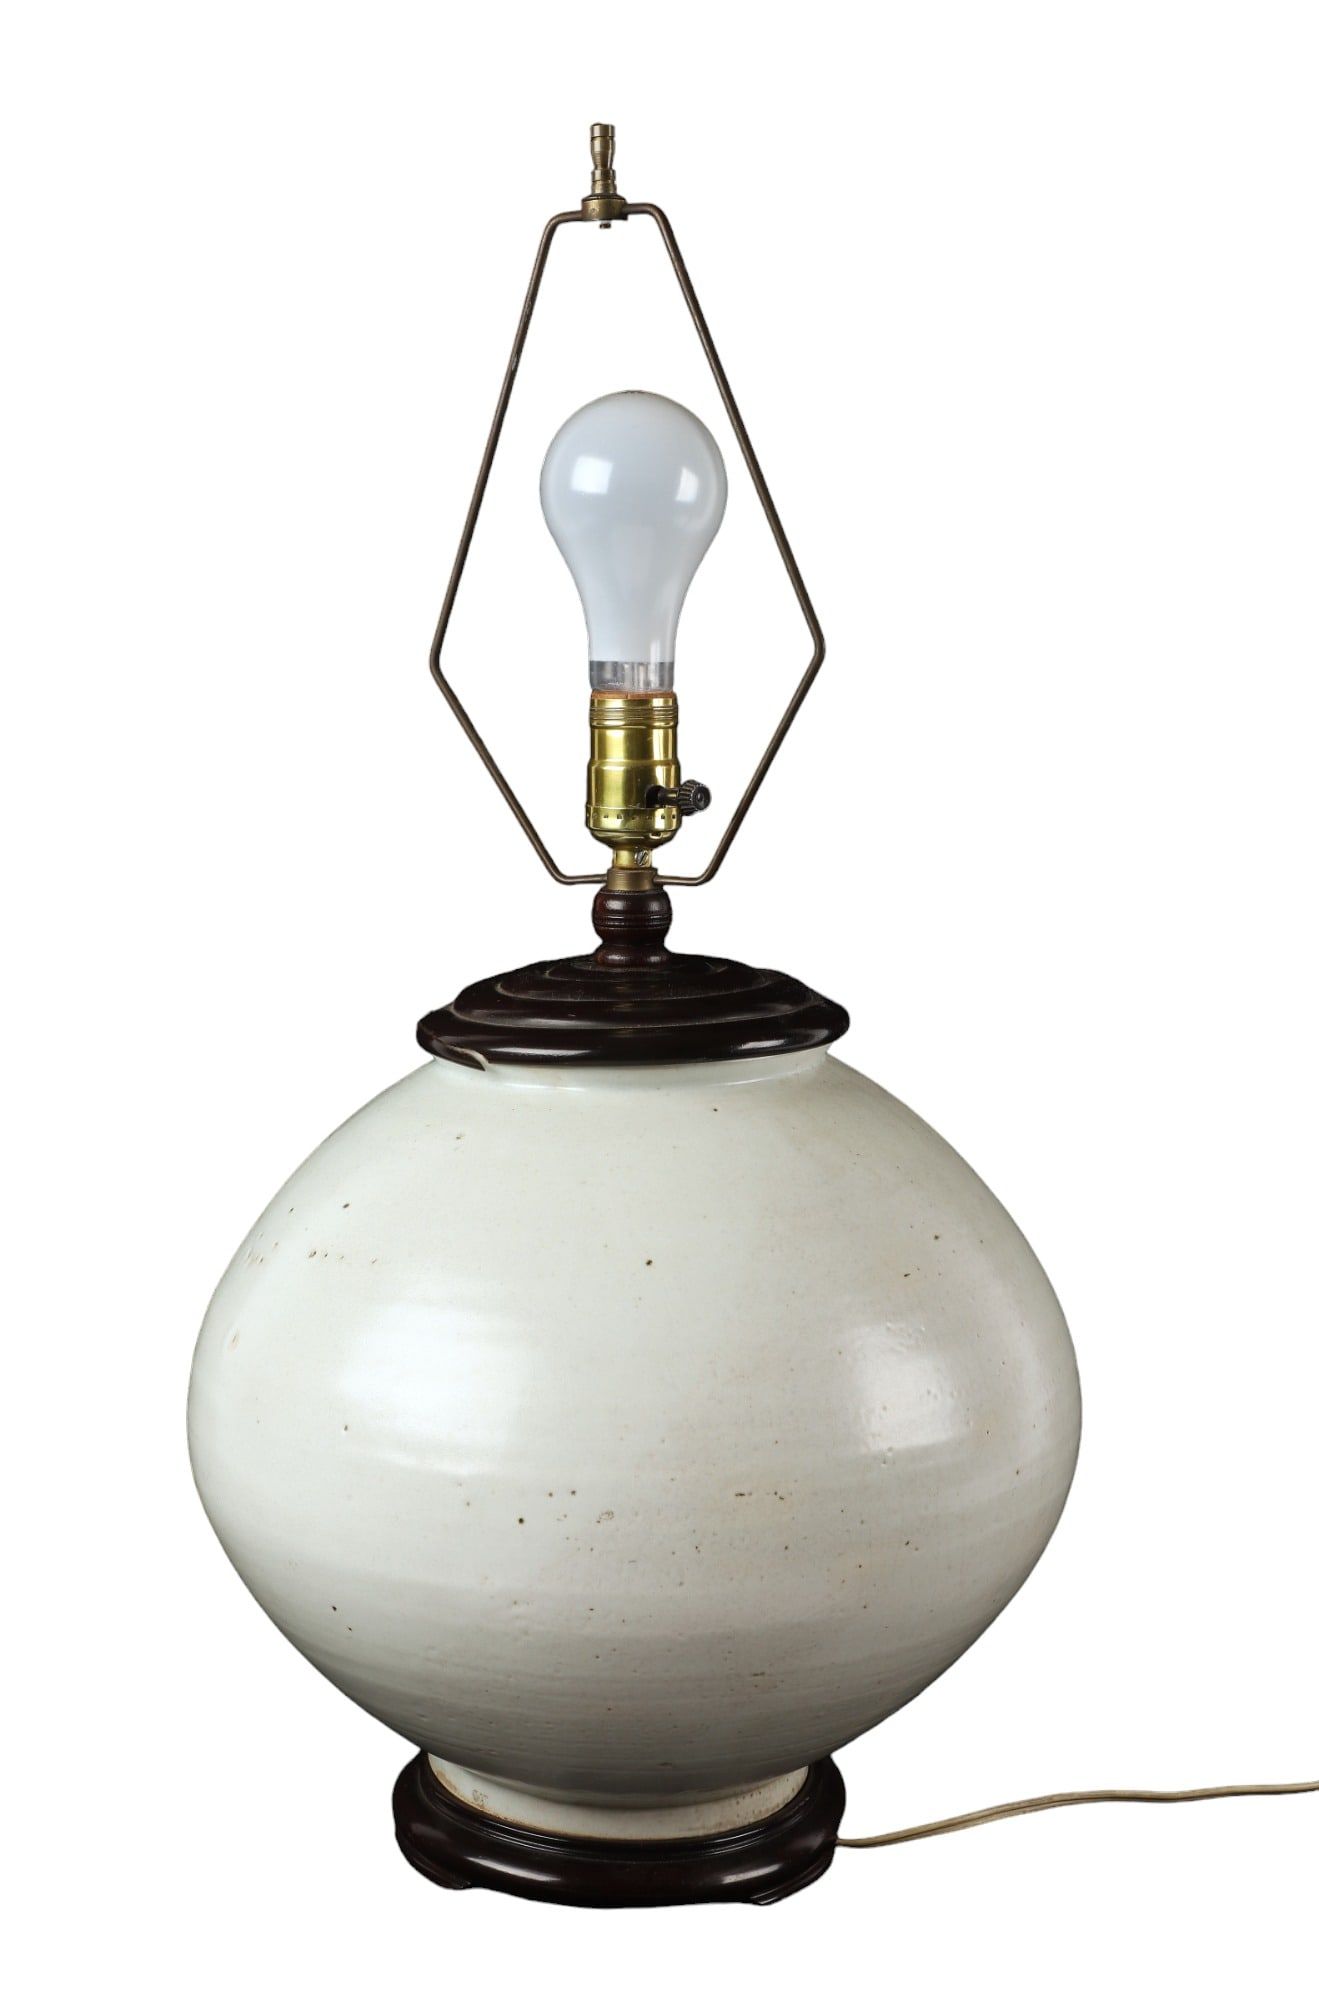 Table lamp formed from a Korean Joseon period moon jar, which hammered for $11,000 and sold for $14,300 with buyer’s premium at William Bunch.